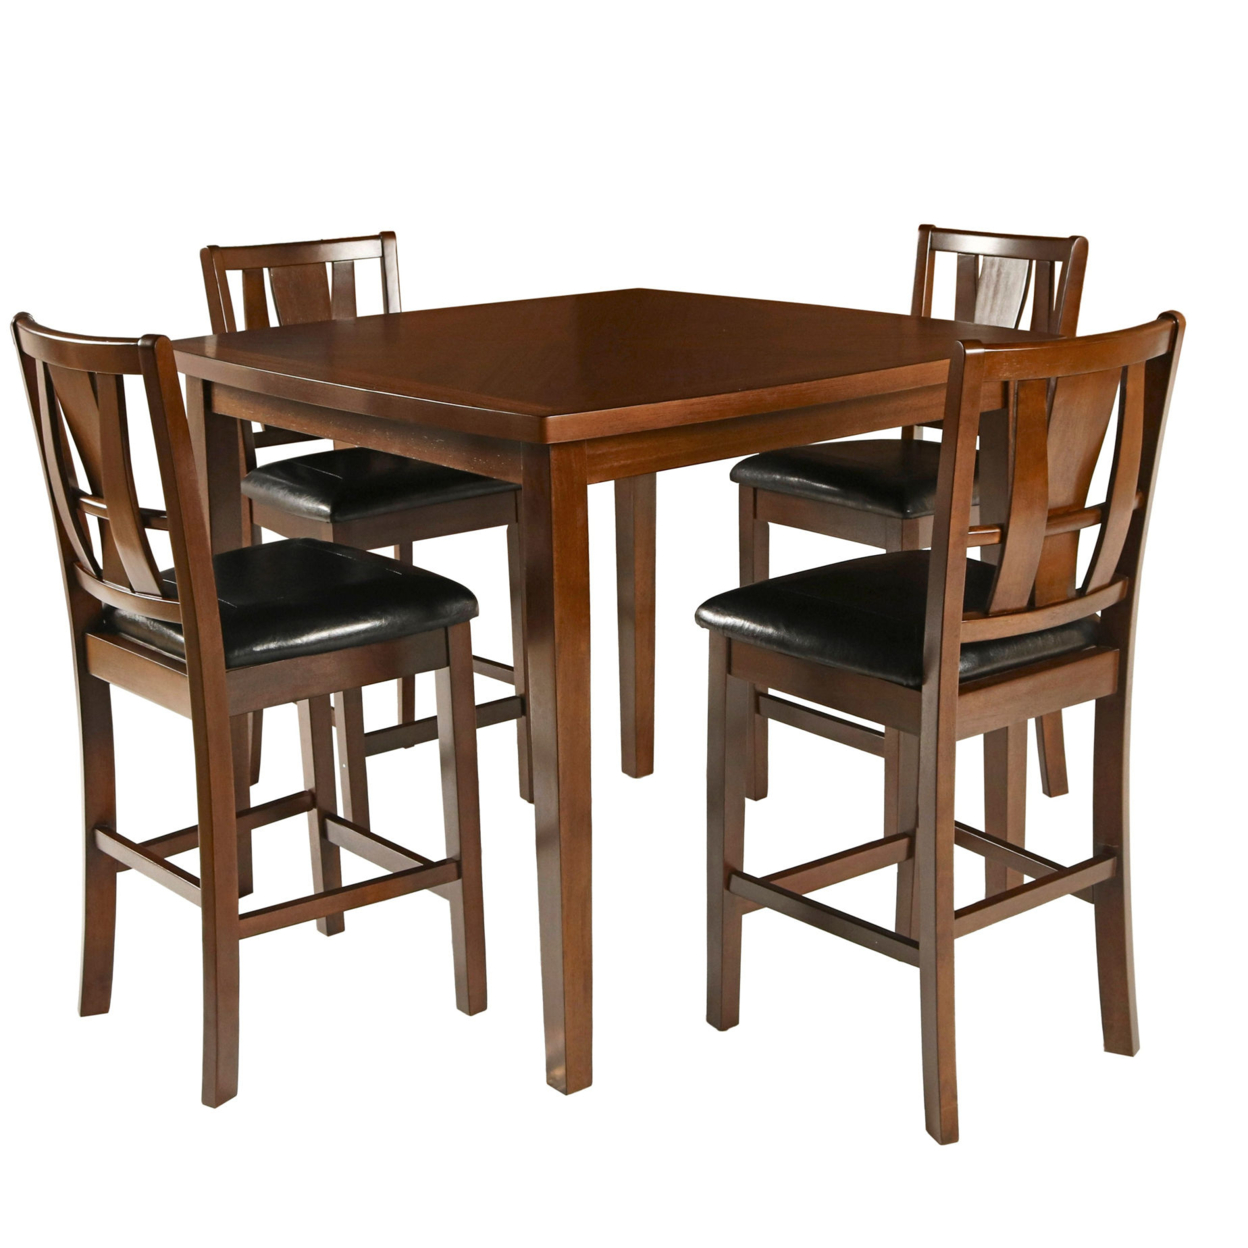 Wooden 5 Piece Counter Height Dining Set, Brown And Black- Saltoro Sherpi